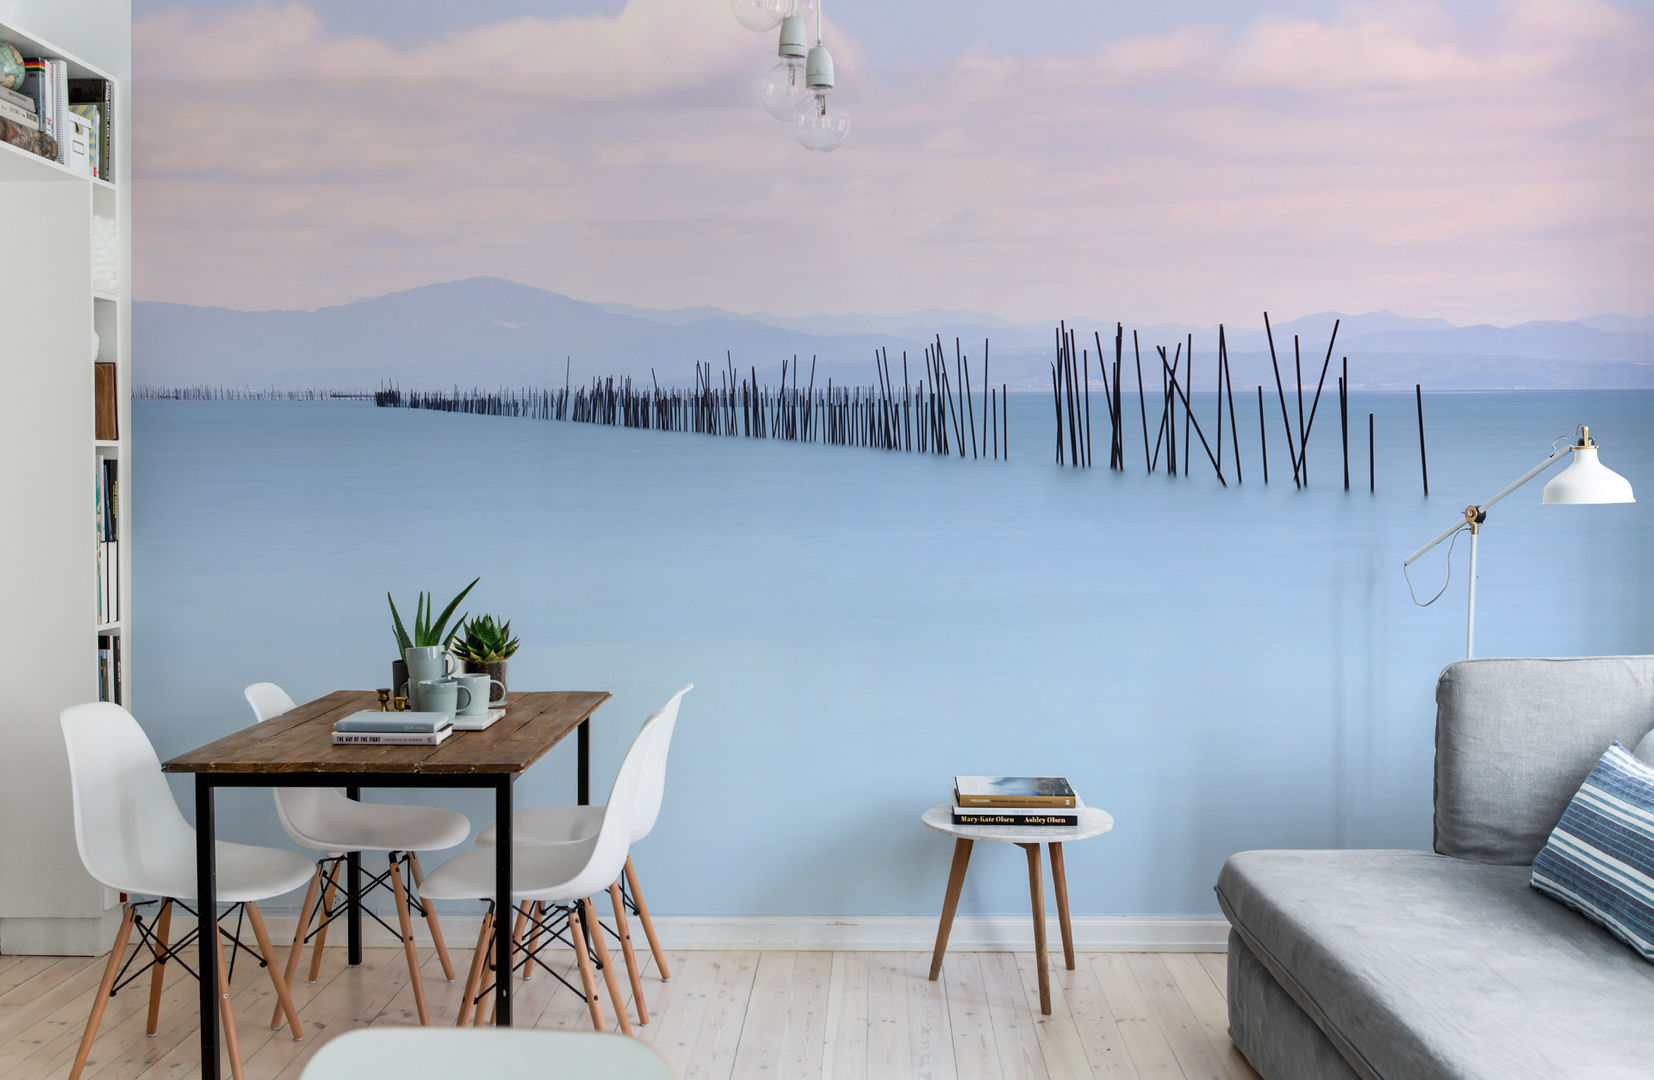 Lake under the snow Pixers Salle à manger scandinave serenity,wall mural,wallpaper,lake,snow,winter